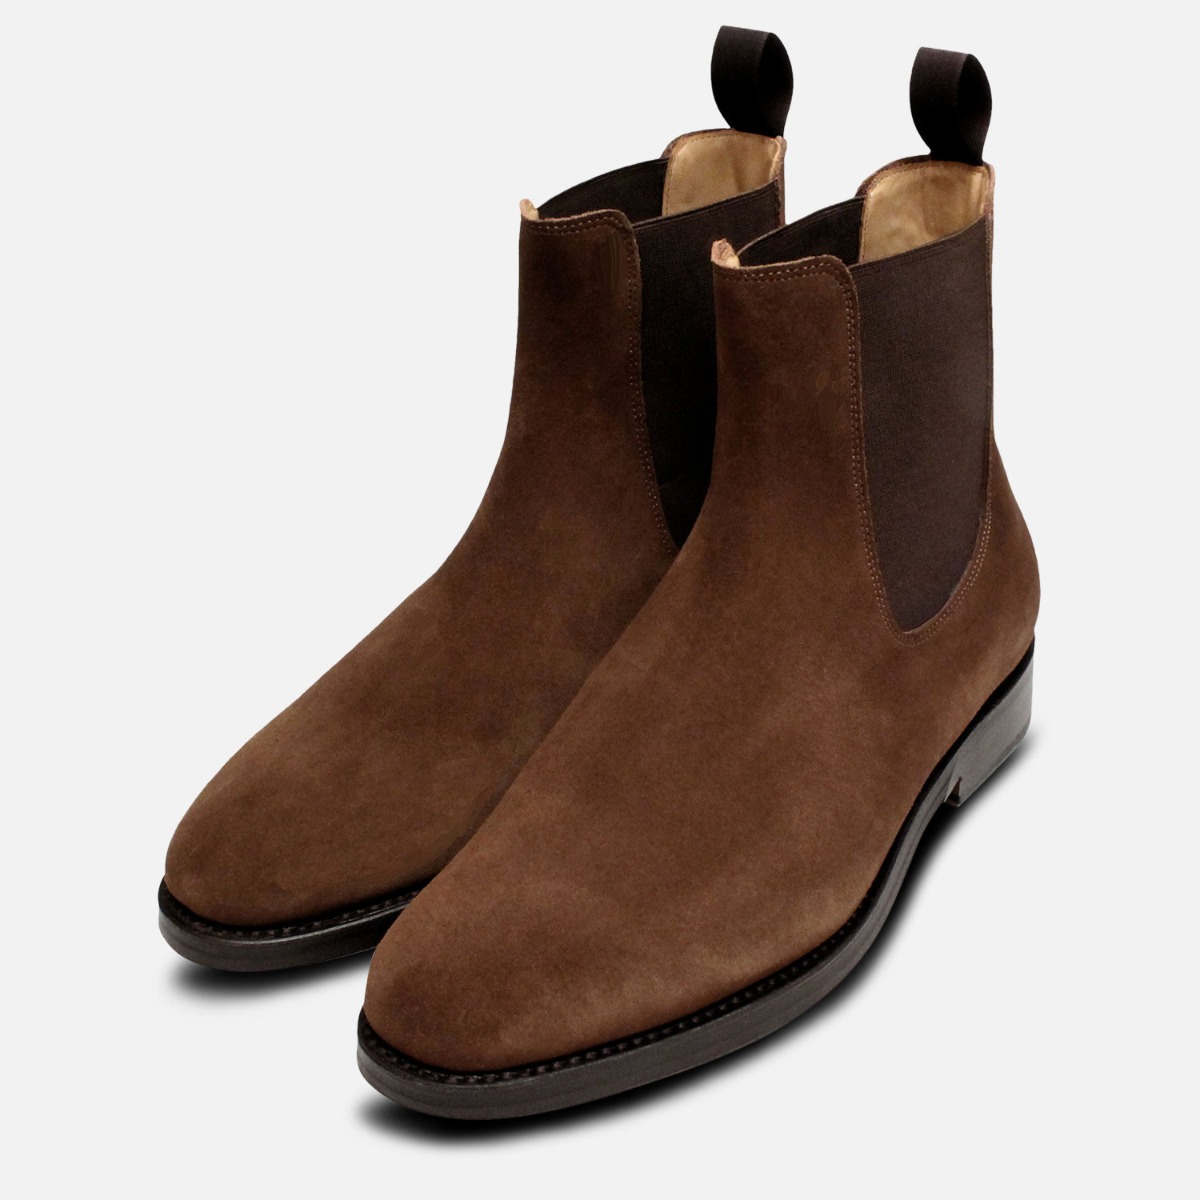 Brown Suede Goodyear Welted Wholecut Chelsea Boot | eBay